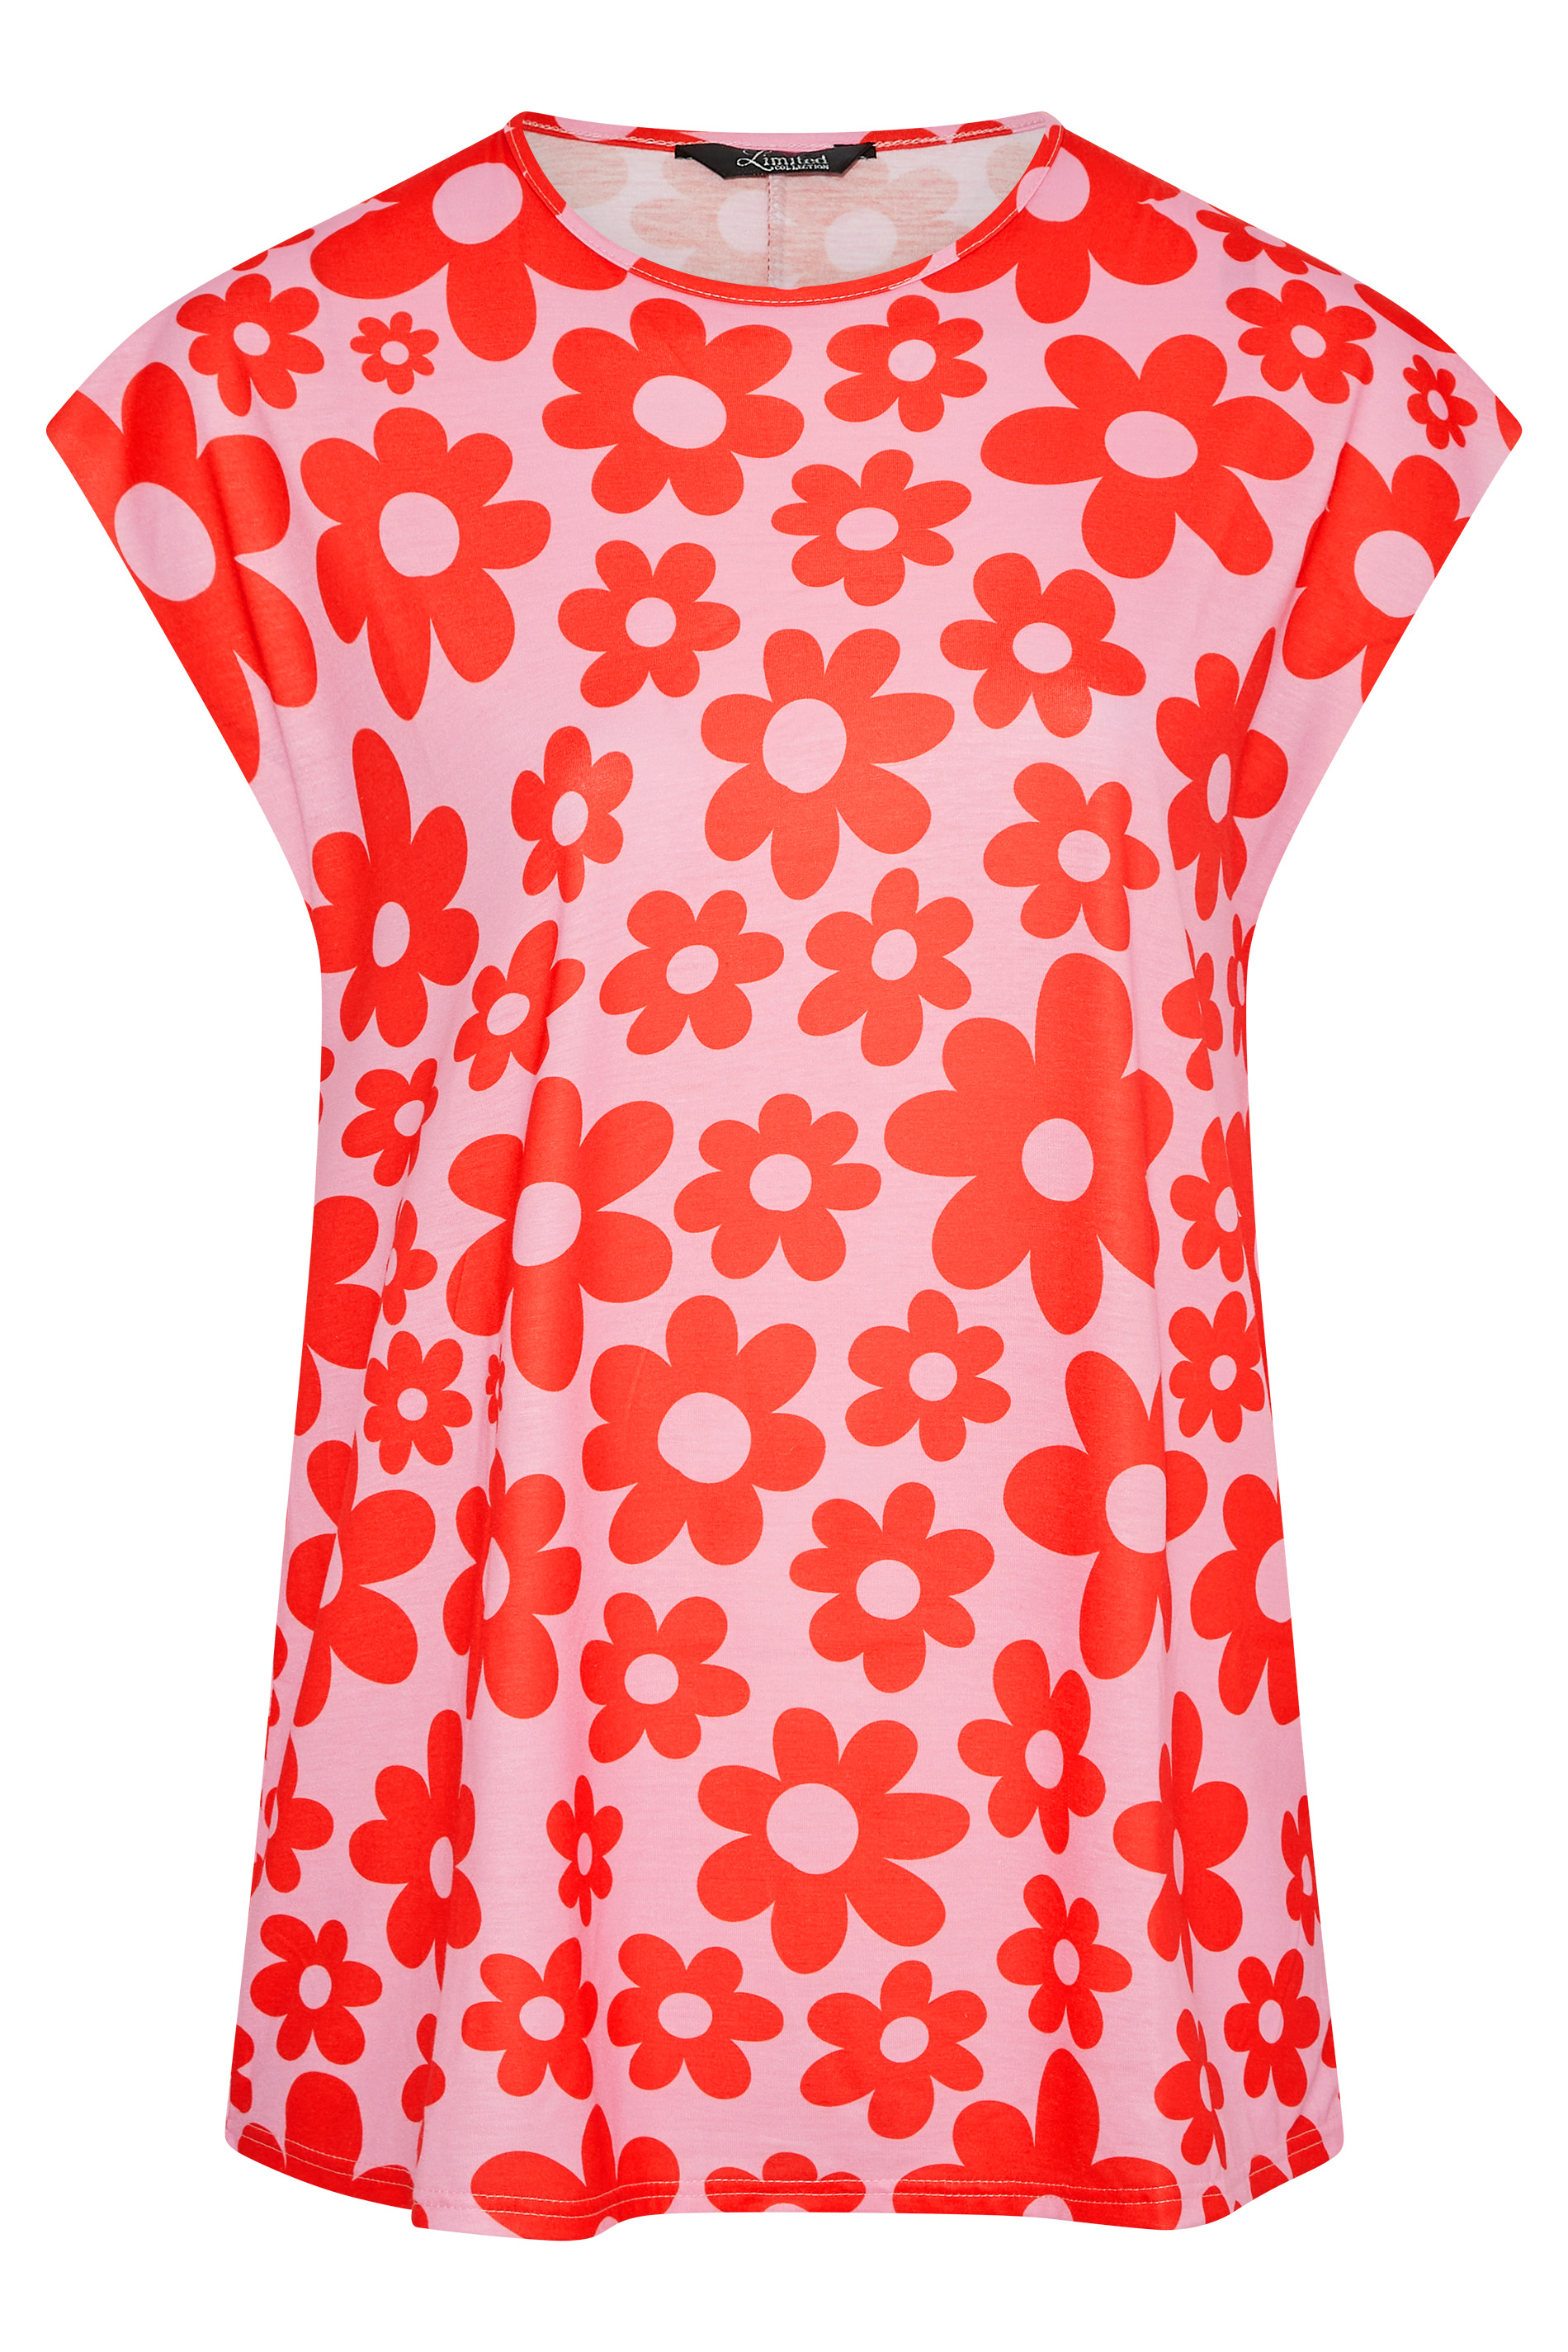 Grande taille  Tops Grande taille  Tops Jersey | LIMITED COLLECTION - T-Shirt Rétro Rose Floral Rouge - YW85547